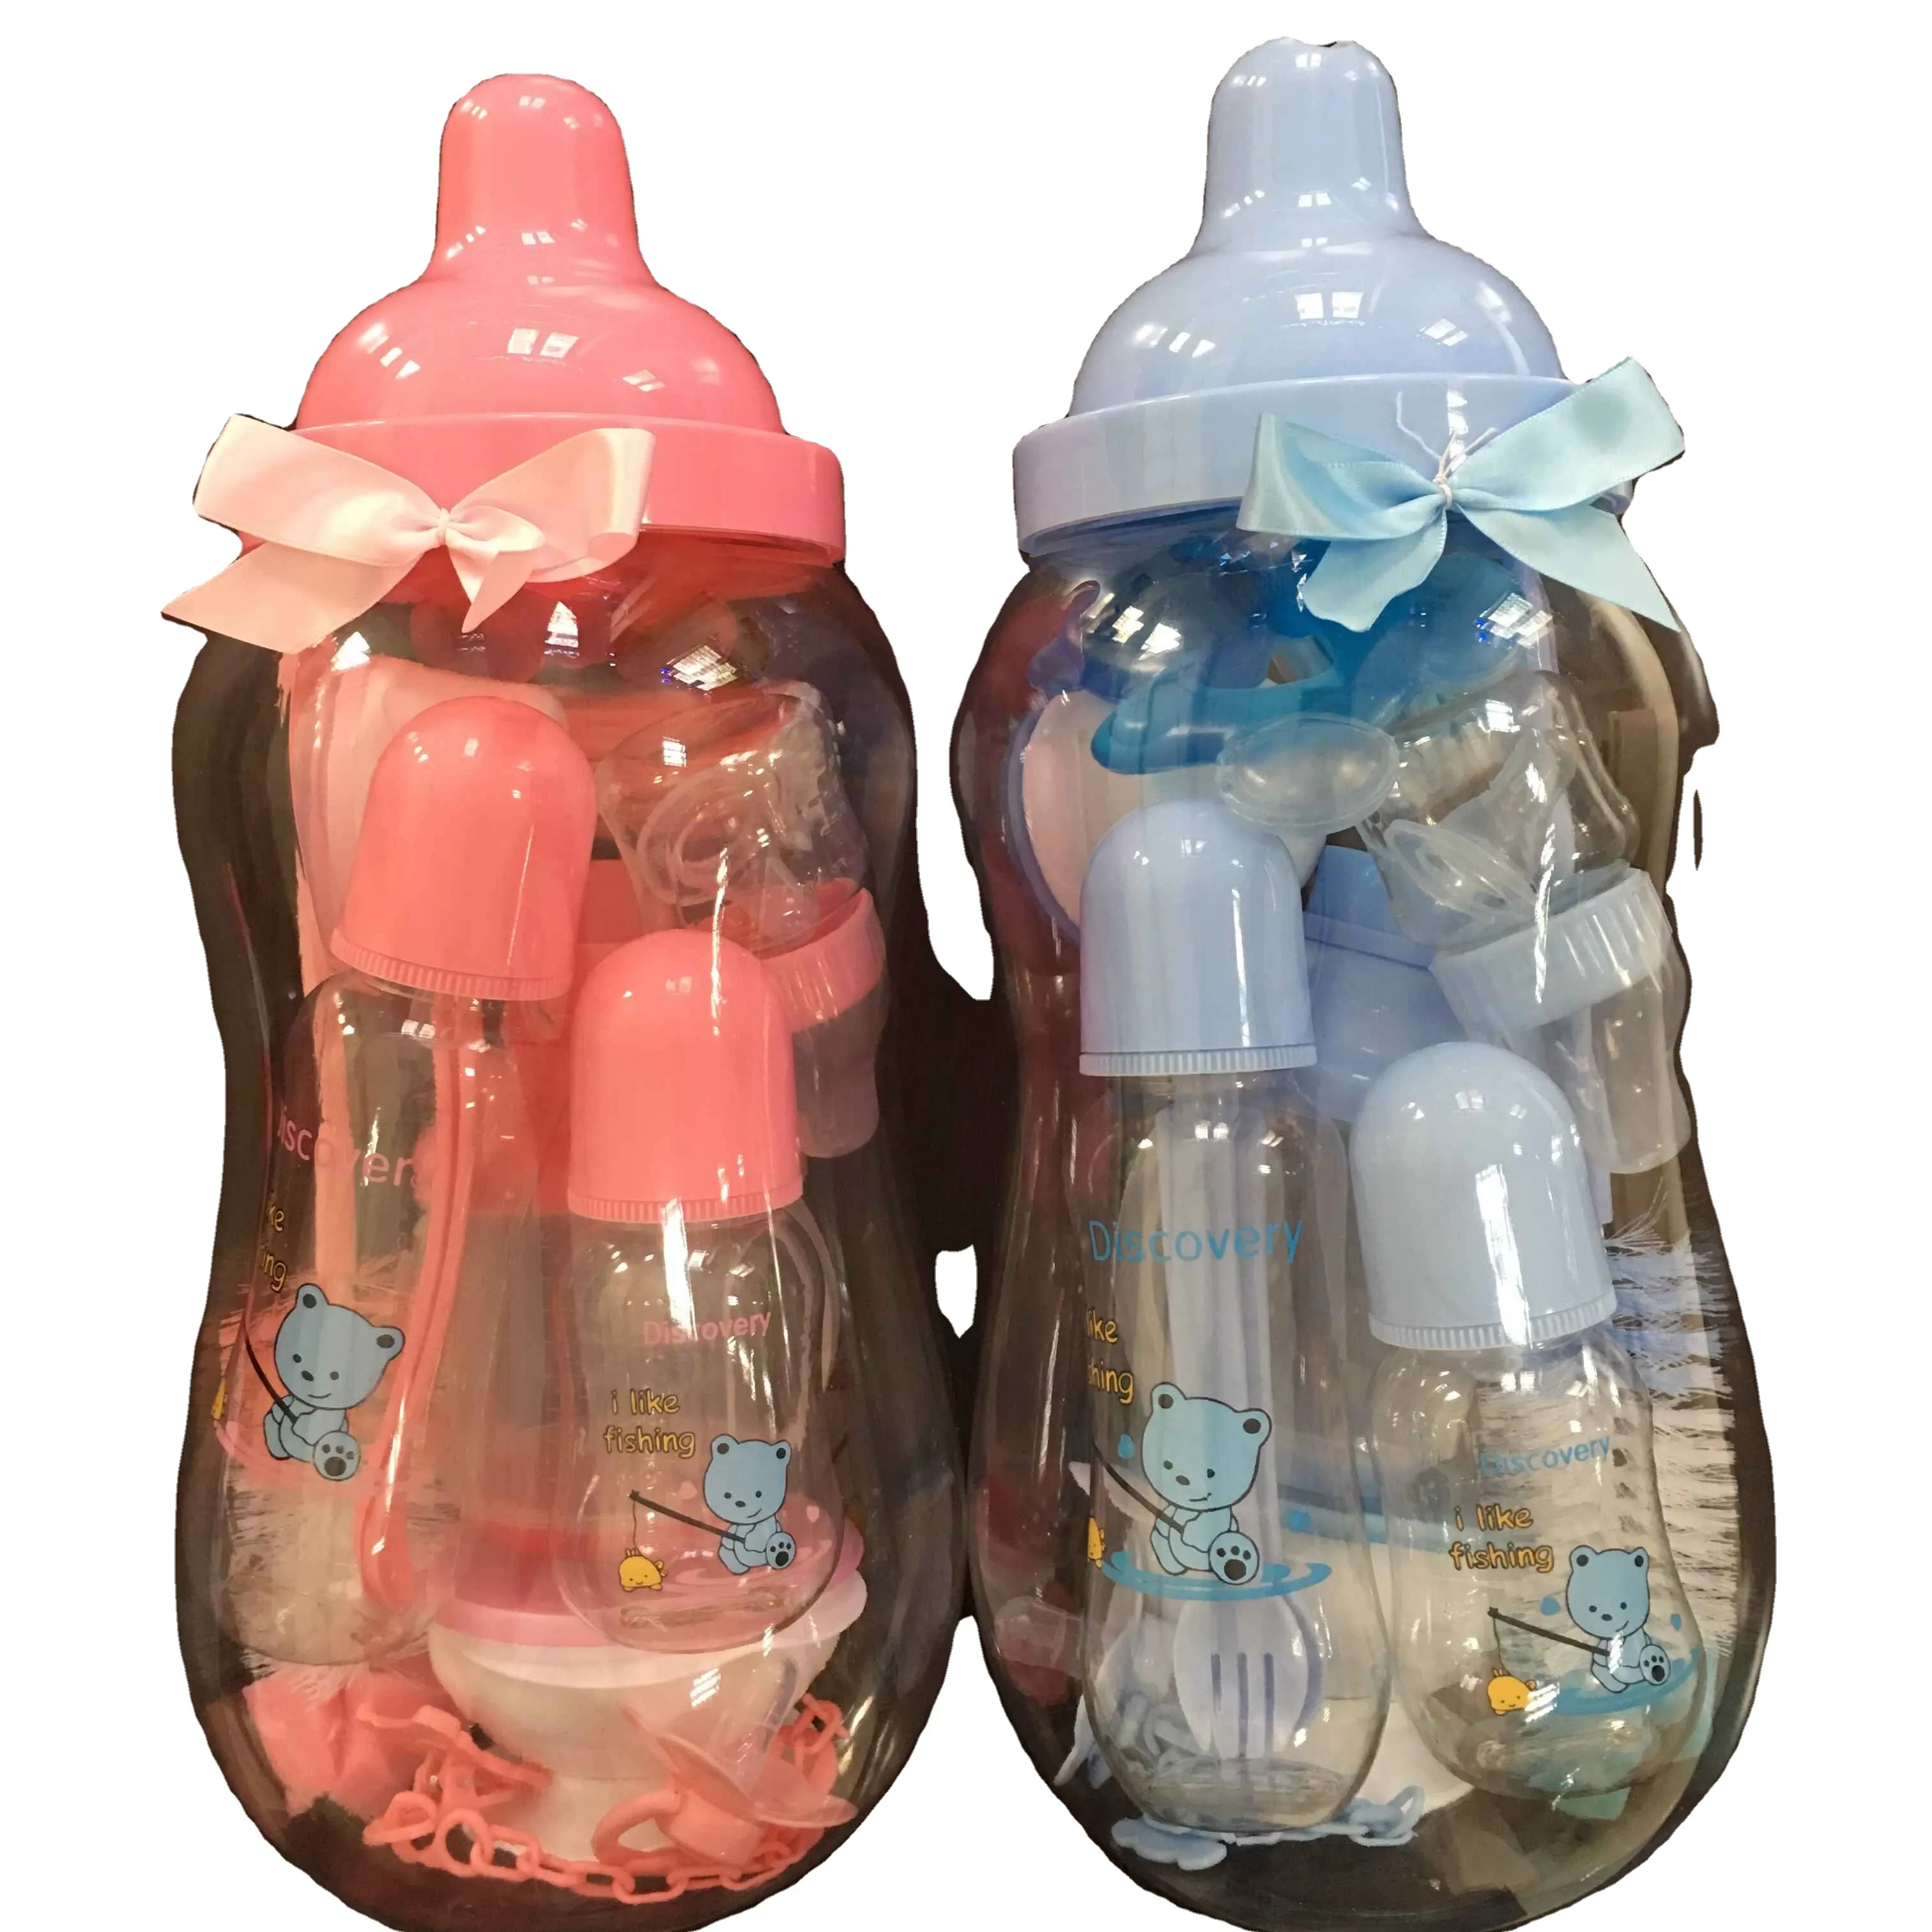 Africa Hot Selling High Quality Pc Material Big Feeding Bottle Gift Set Baby Bank For Africa Market